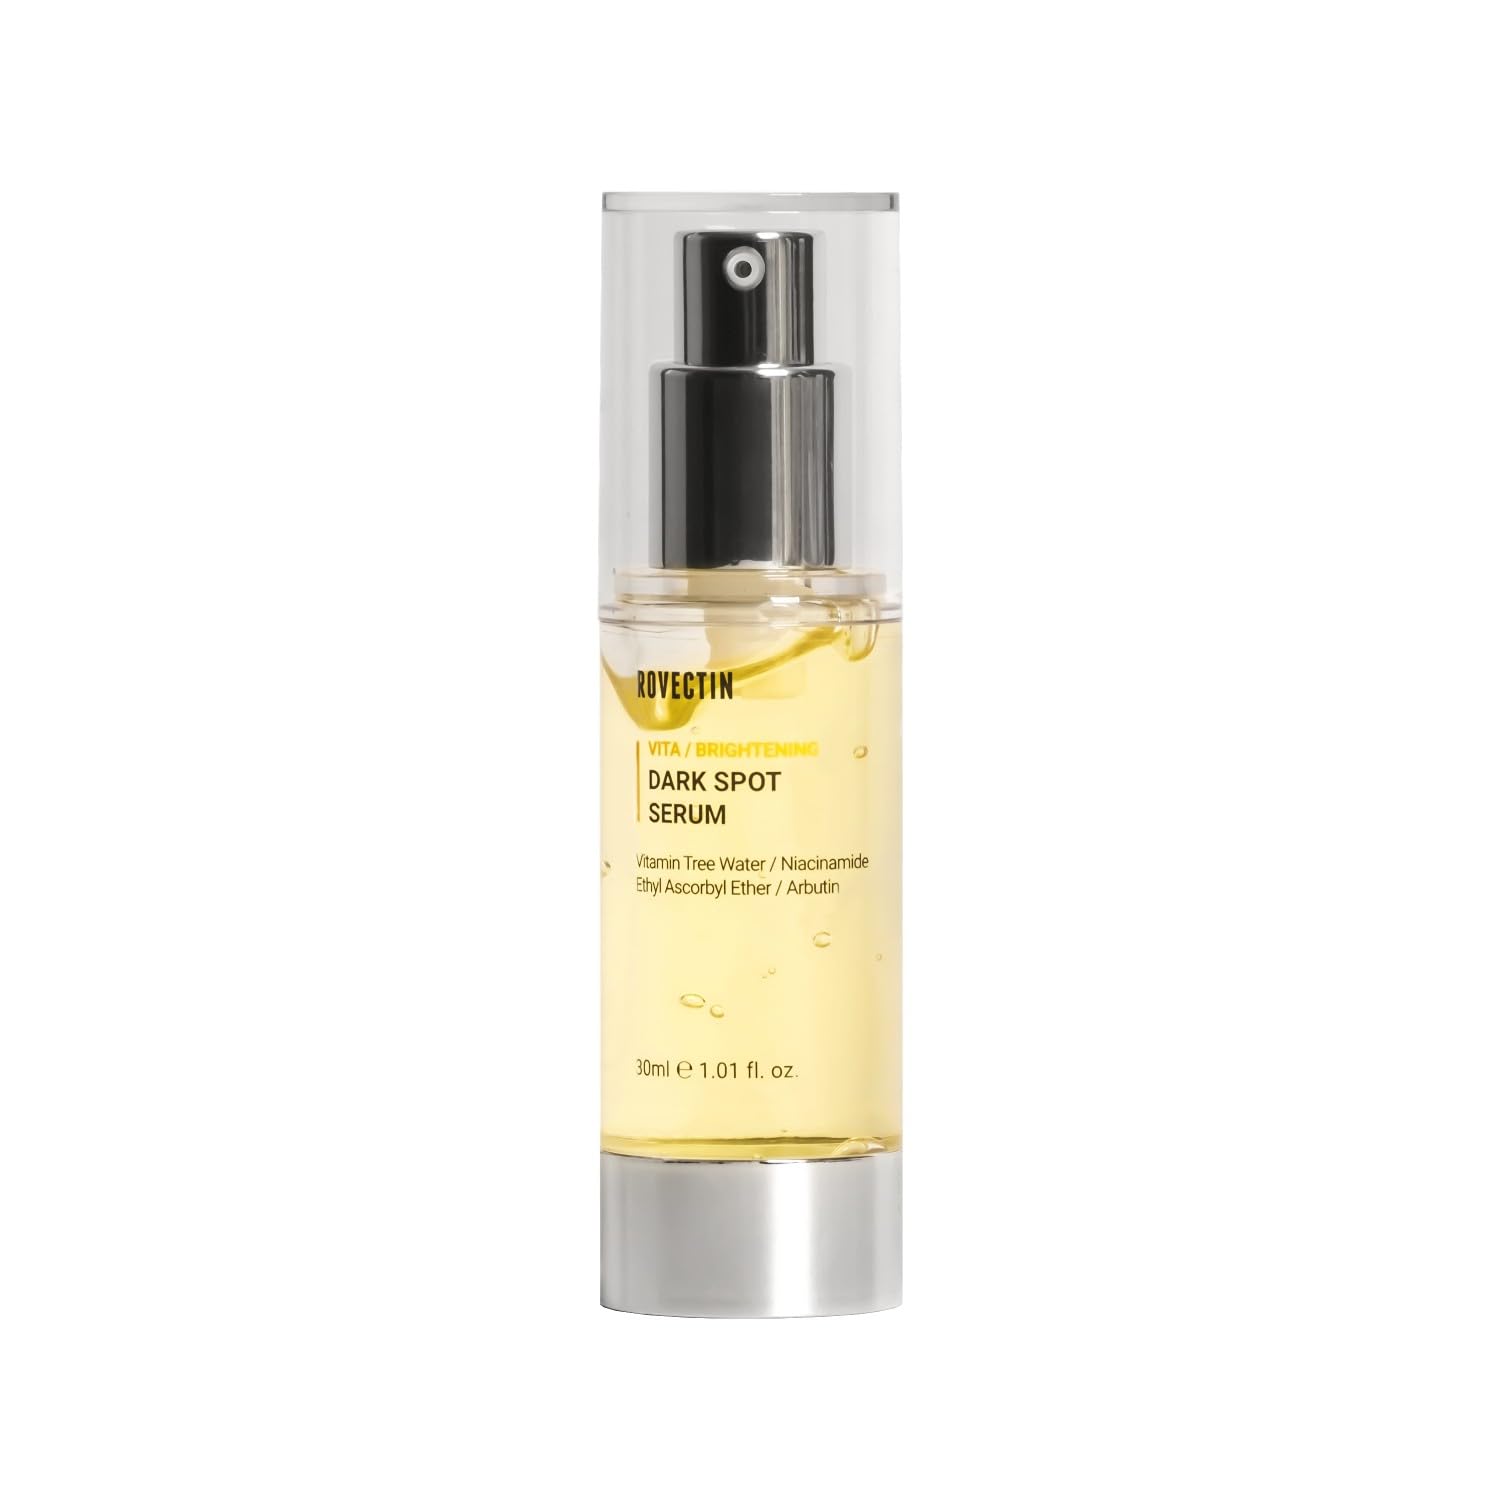 [Rovectin] Vita Dark Spot Serum for clearing and evening skin tone with rich Vitamin C